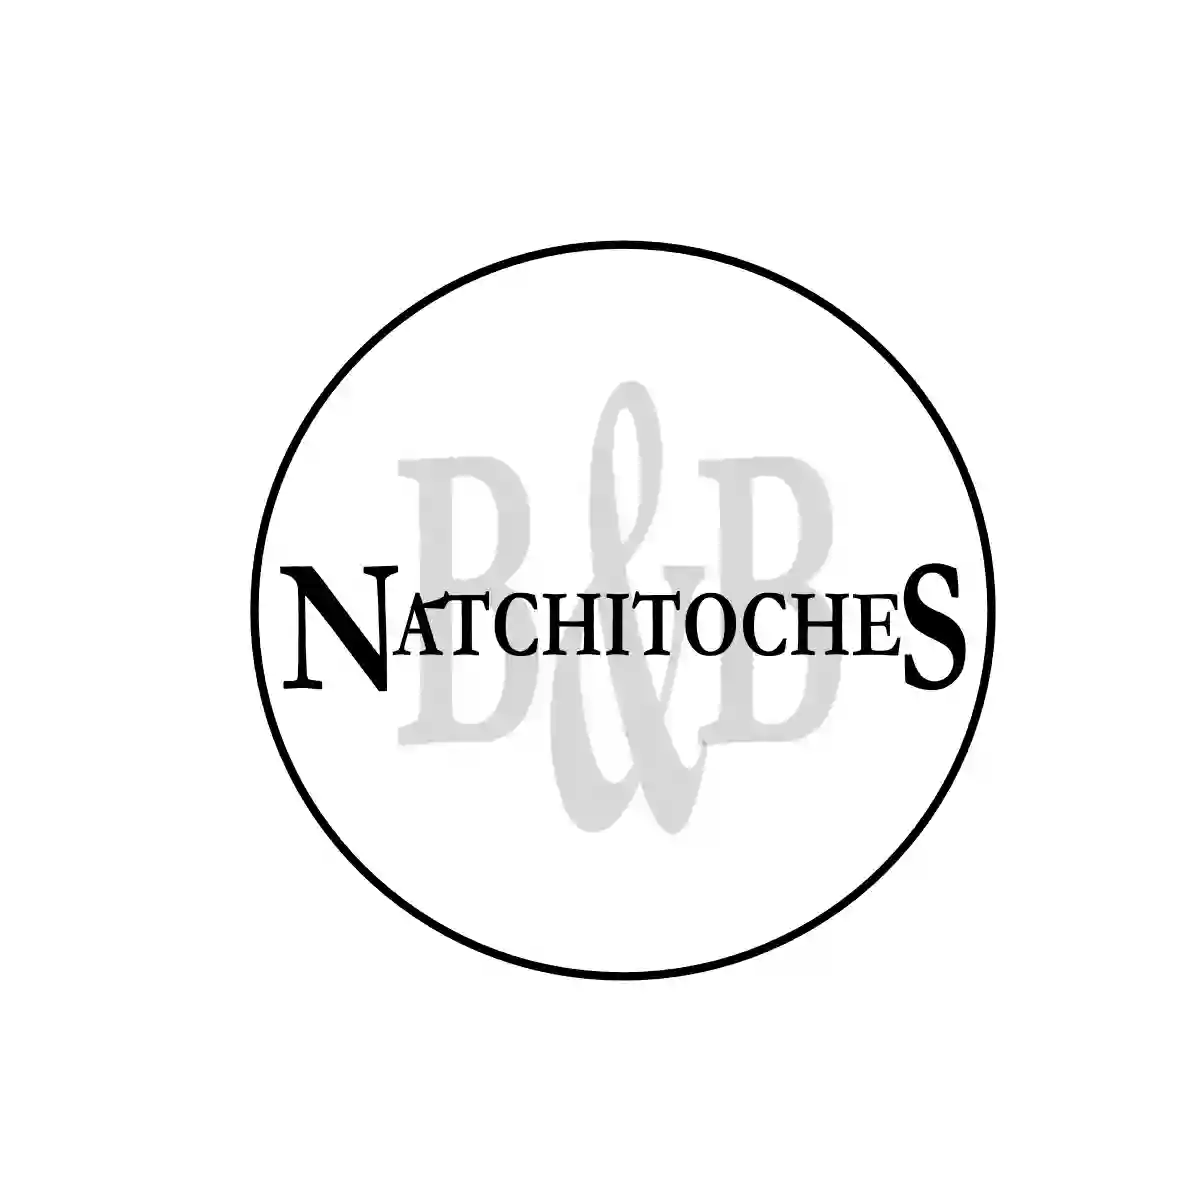 Natchitoches Bed and Breakfast